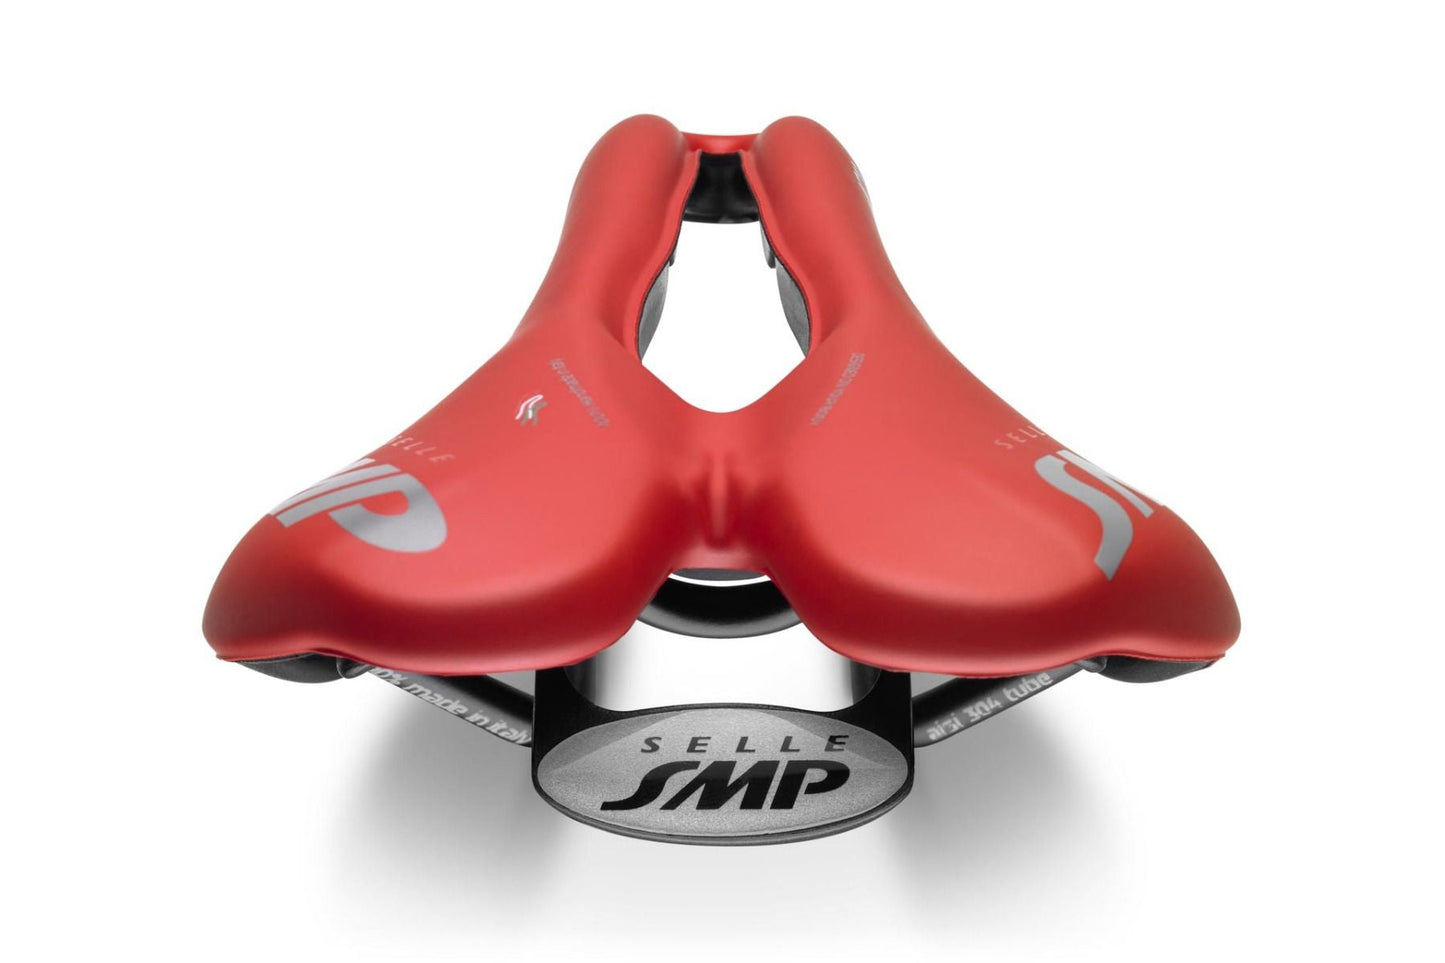 Selle SMP VT20 Saddle with Carbon Rail (Red)